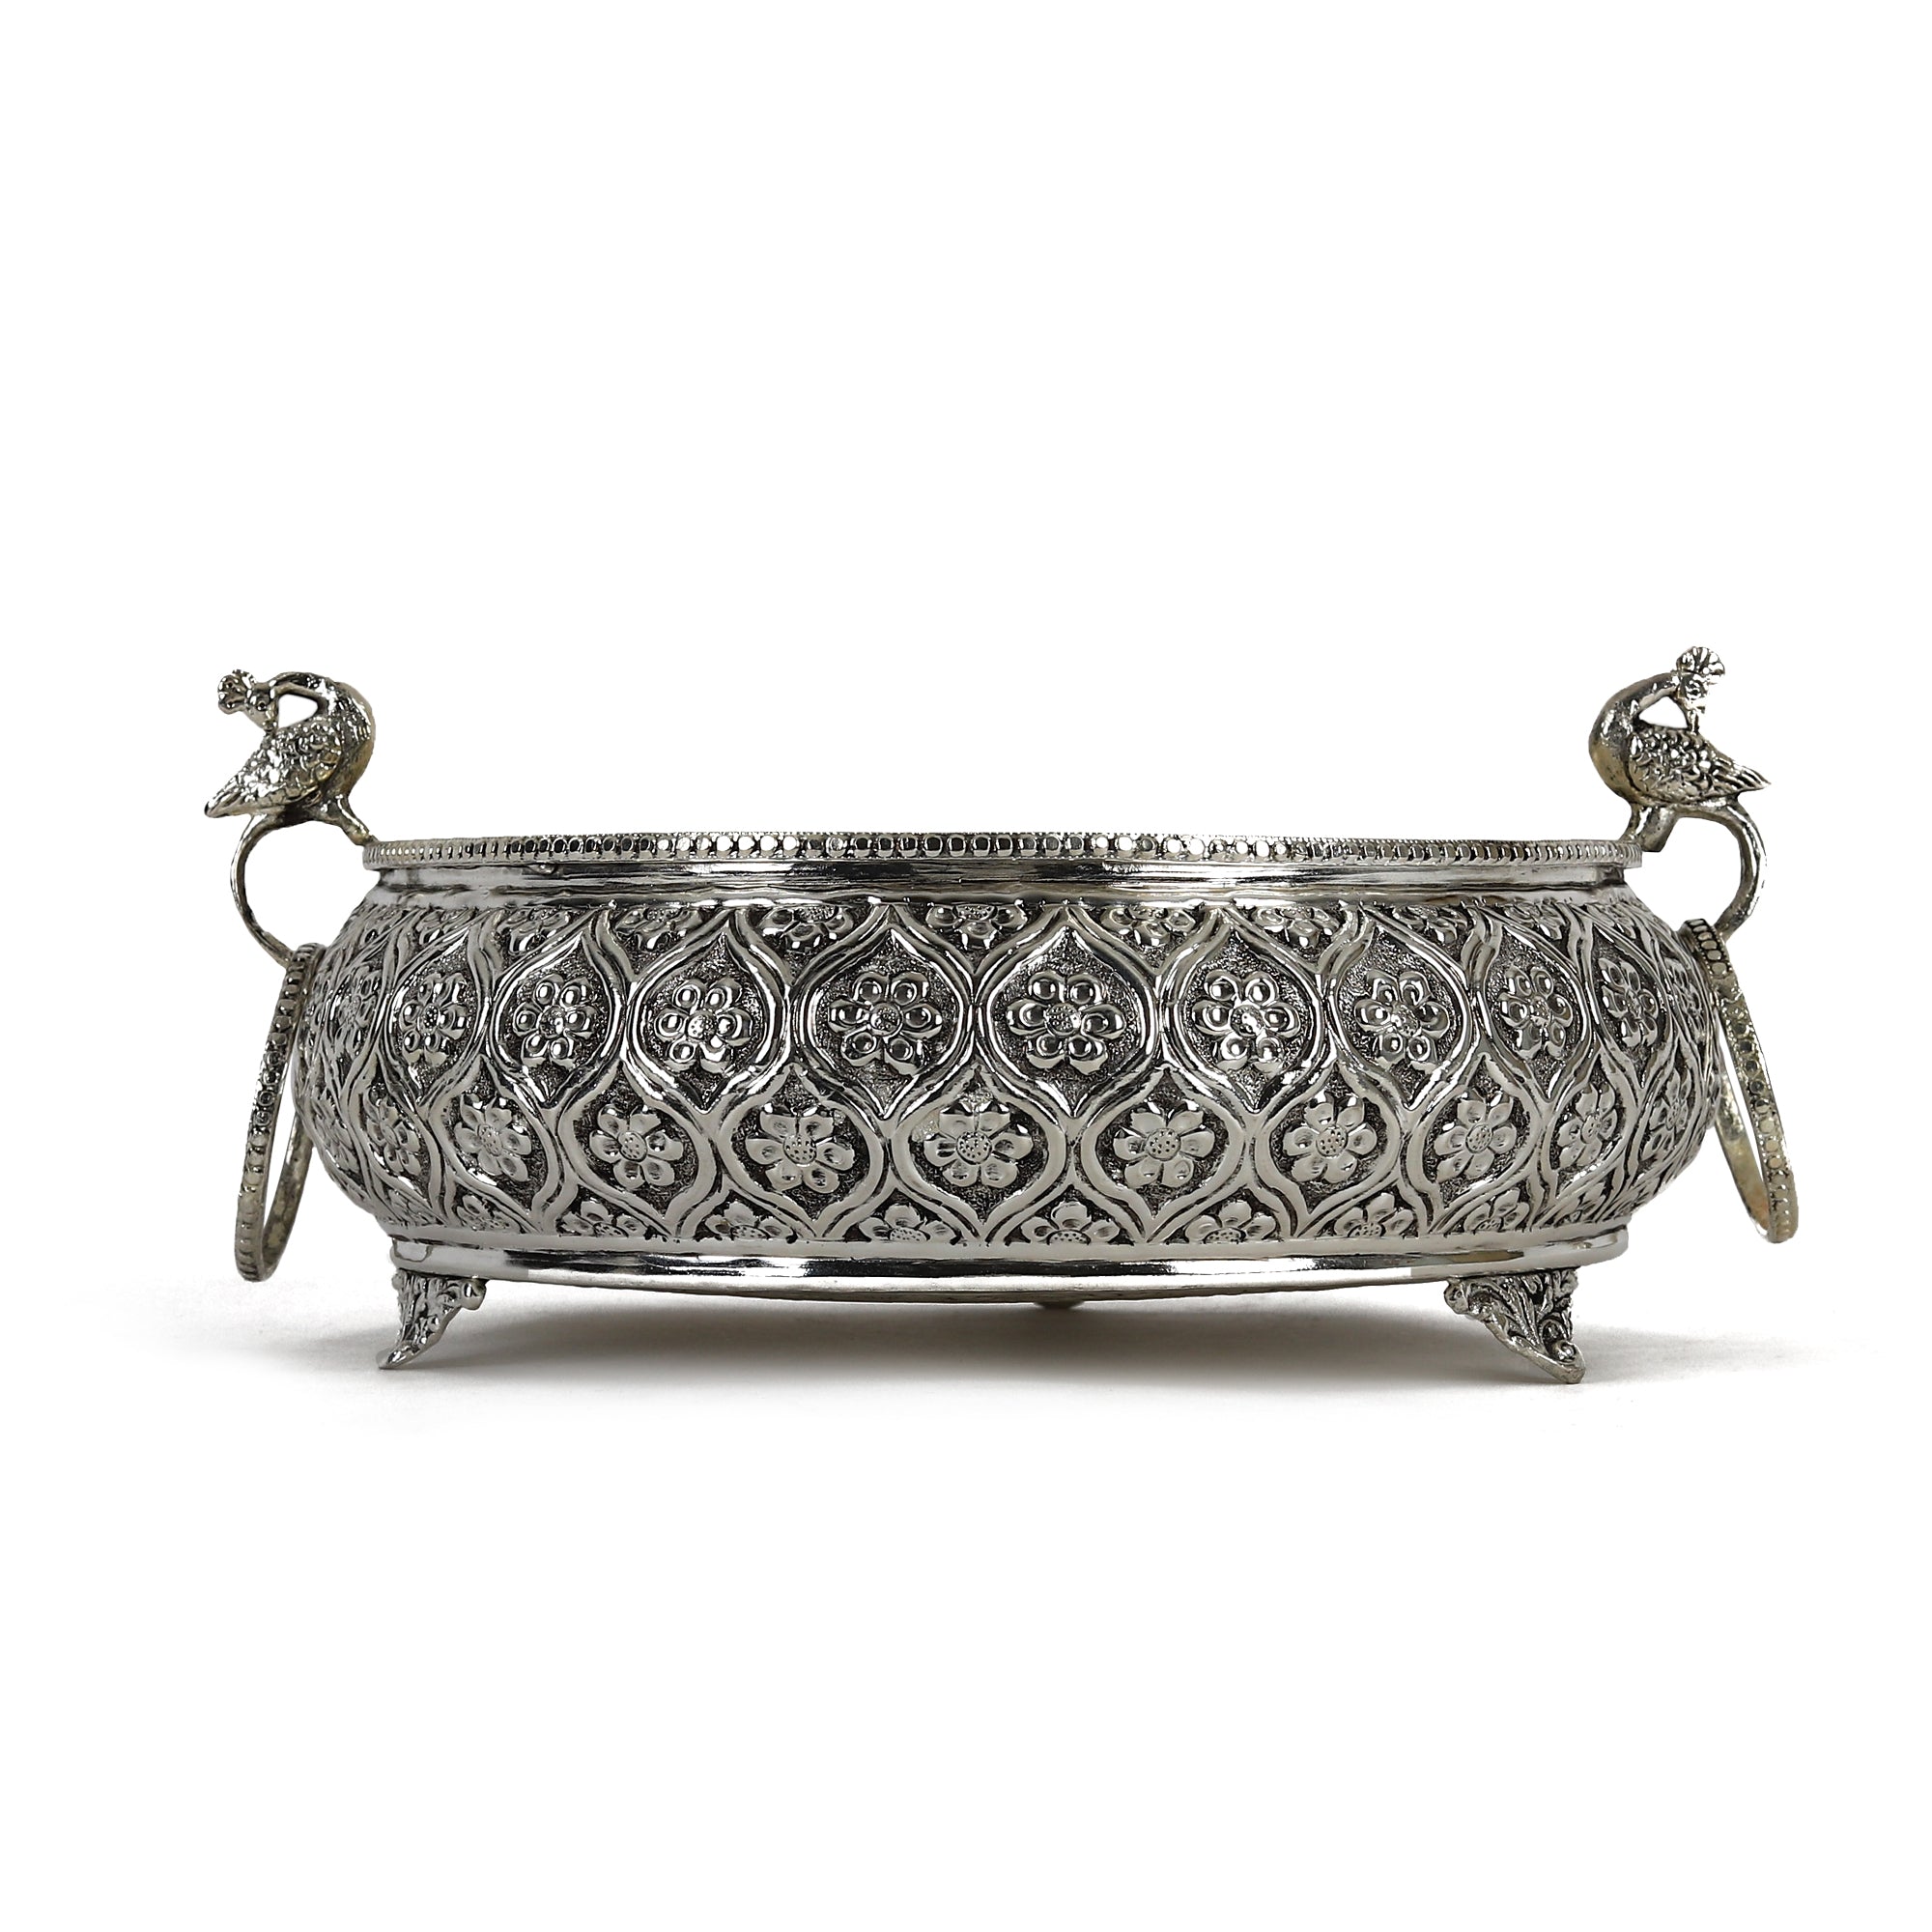 Embracing Elegance and Tradition with Exquisite German Silver Decorative Urli